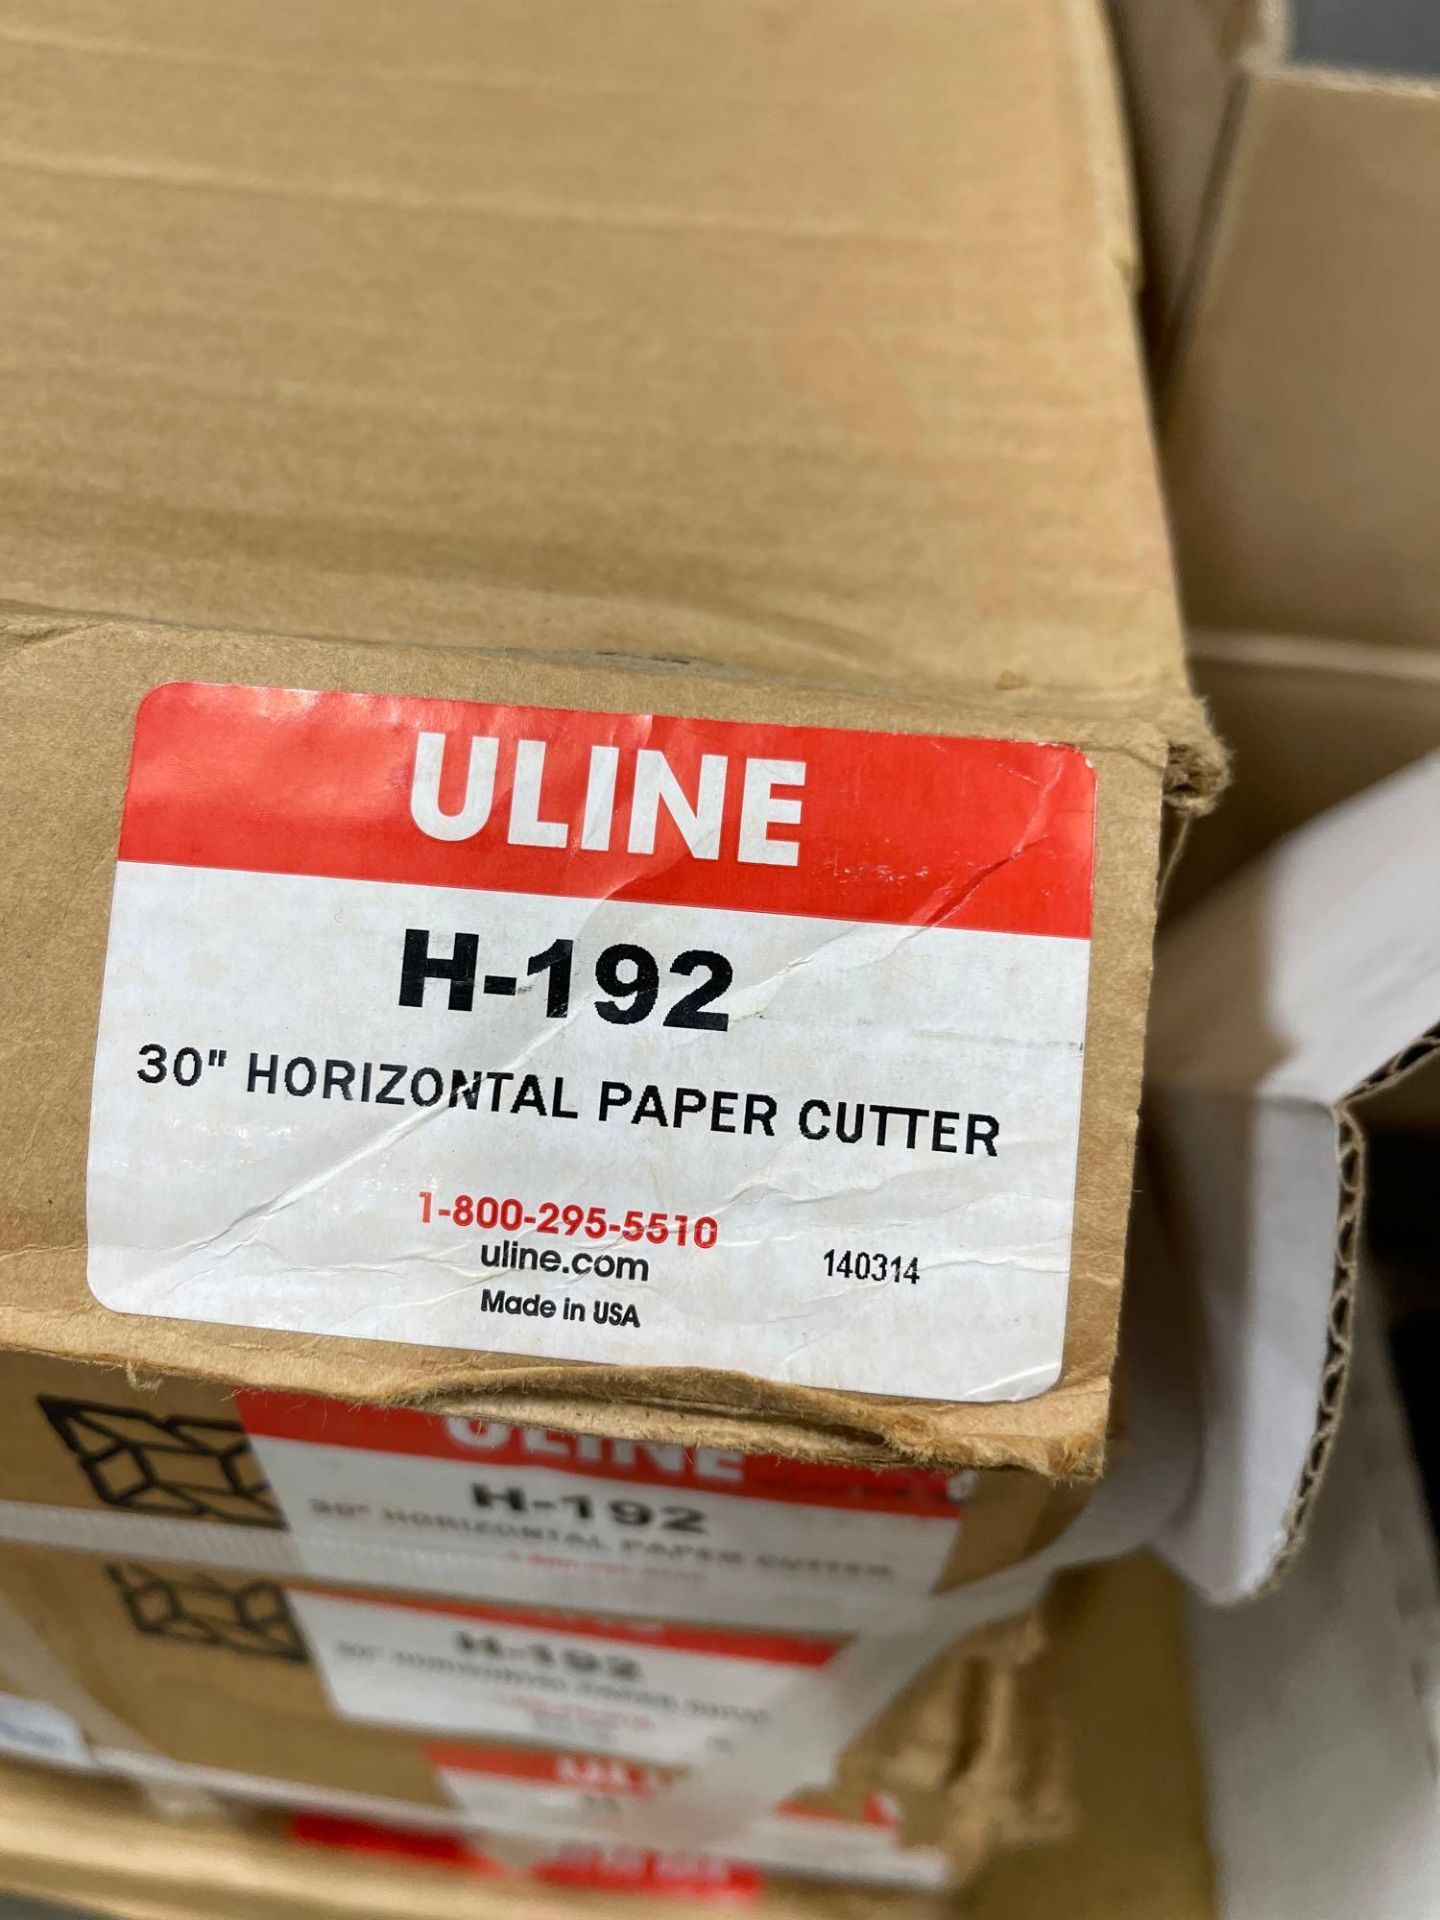 Uline 30" Horizontal Paper Cutter - Image 2 of 2